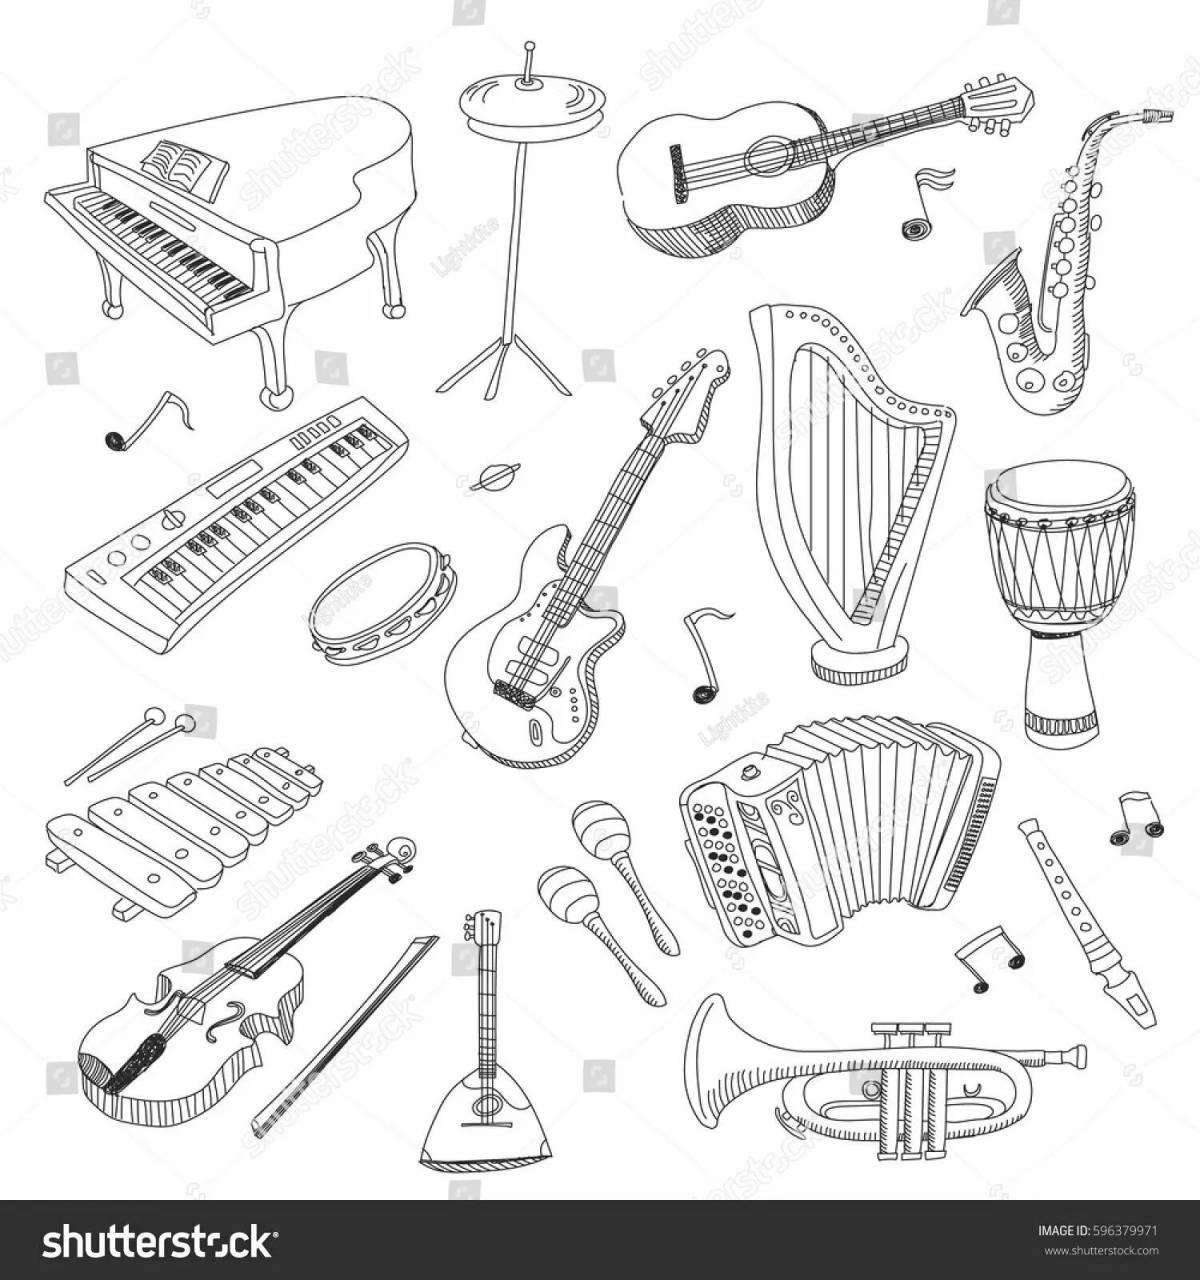 Playful musical instruments coloring page